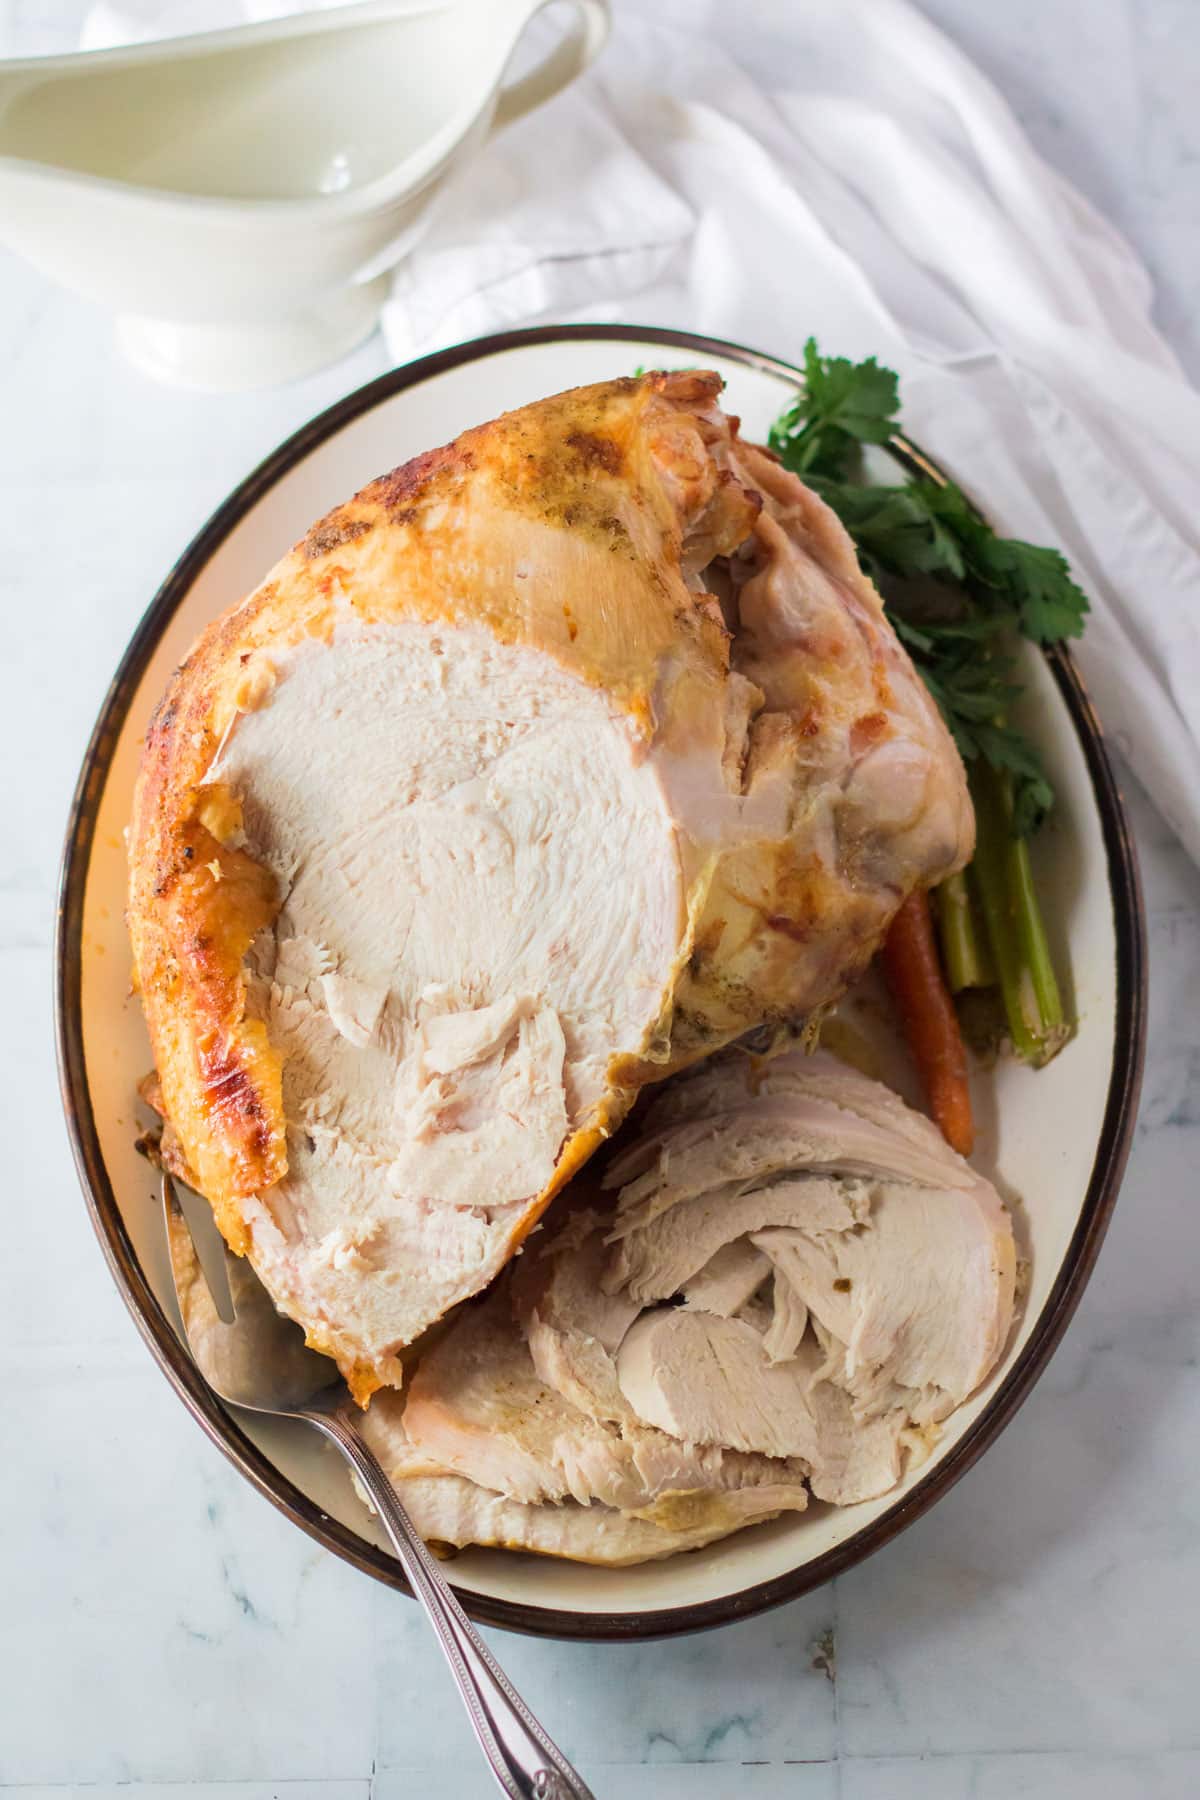 A plate of cooked Slow Cooker Turkey Breast with Vegetables